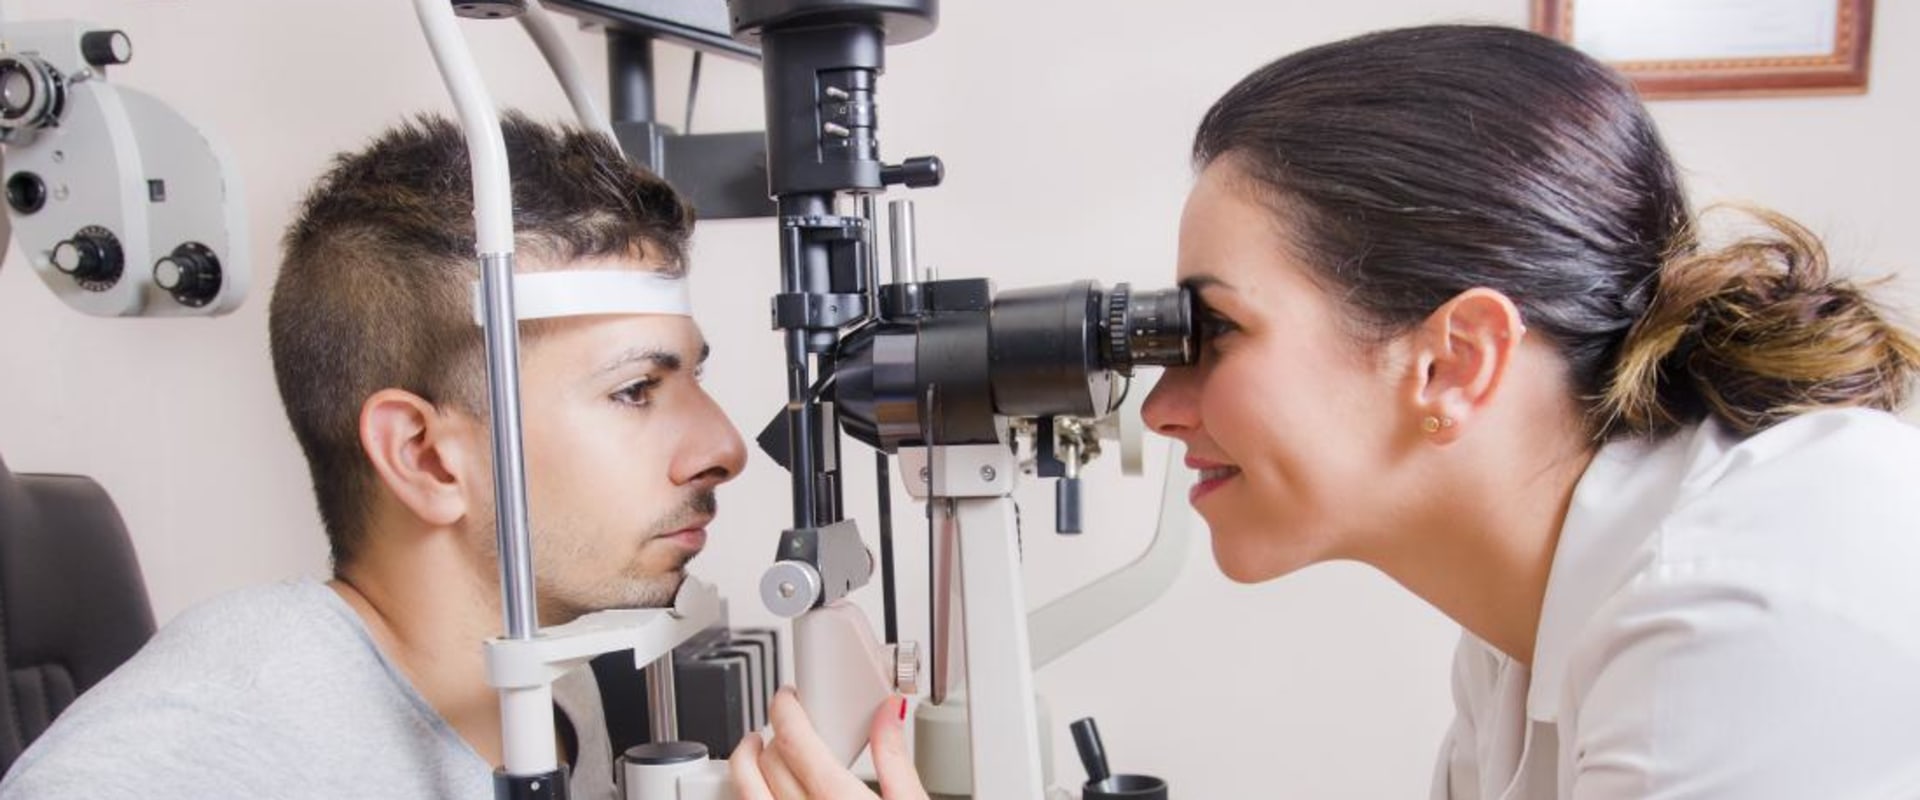 Does an Eye Test Hurt? A Comprehensive Guide